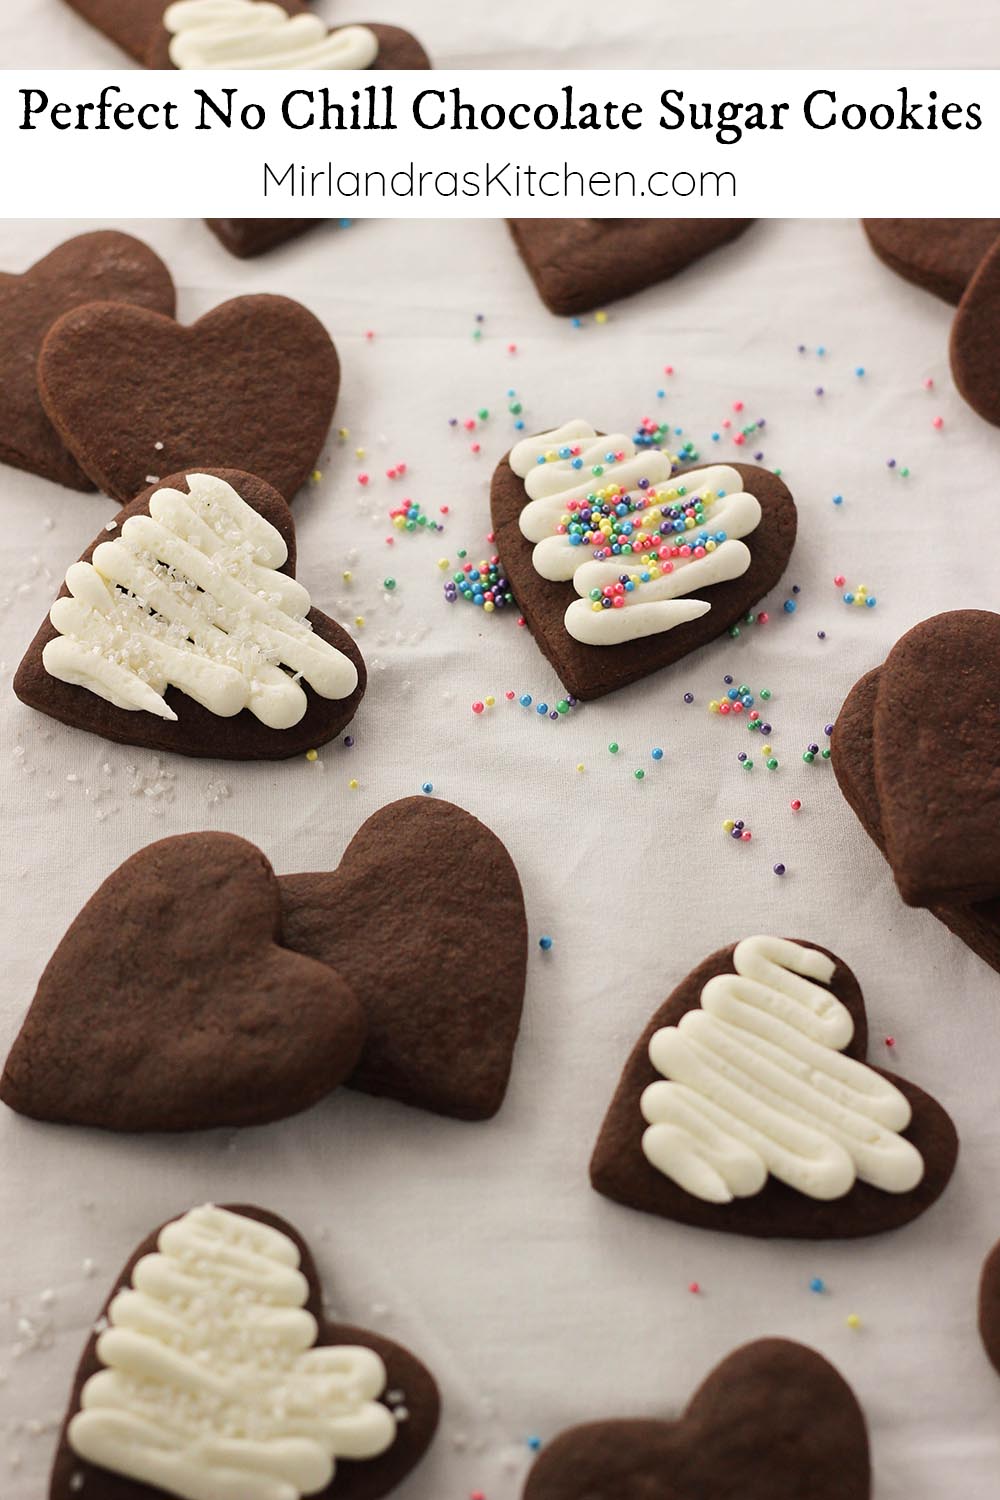 This is the easiest recipe for chocolate sugar cookies that exists! The dough does NOT have to be chilled and the cookies taste wonderful. These are cookies you can actually enjoy making with kids and I’ve included a great buttercream frosting recipe to decorate with! 